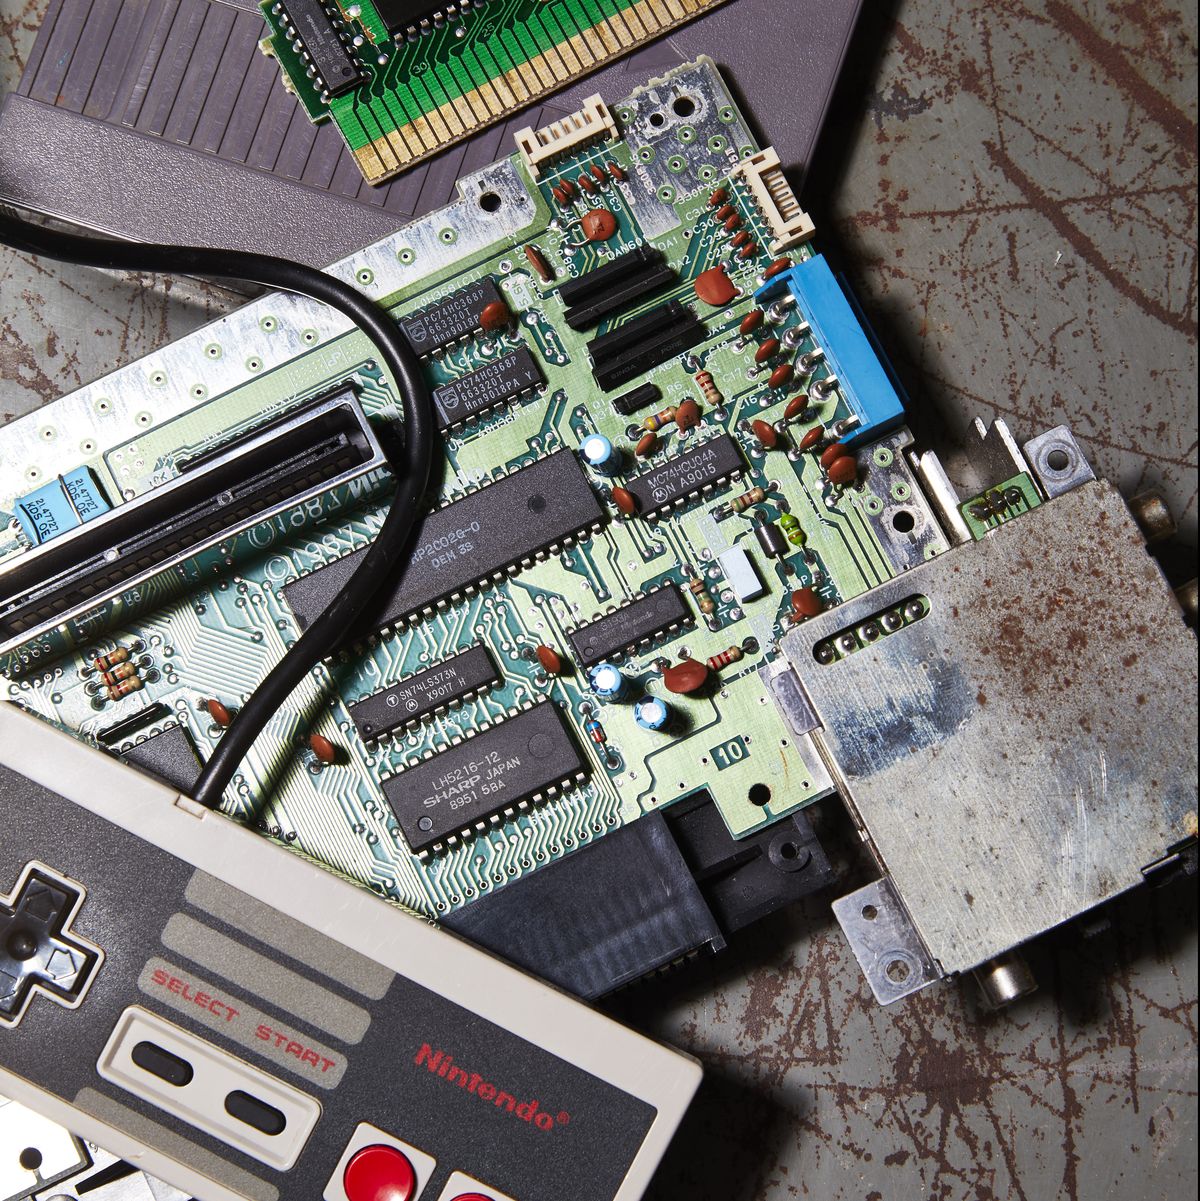 a closer look at the 10nes chip, the family friendly gatekeeper for the nes